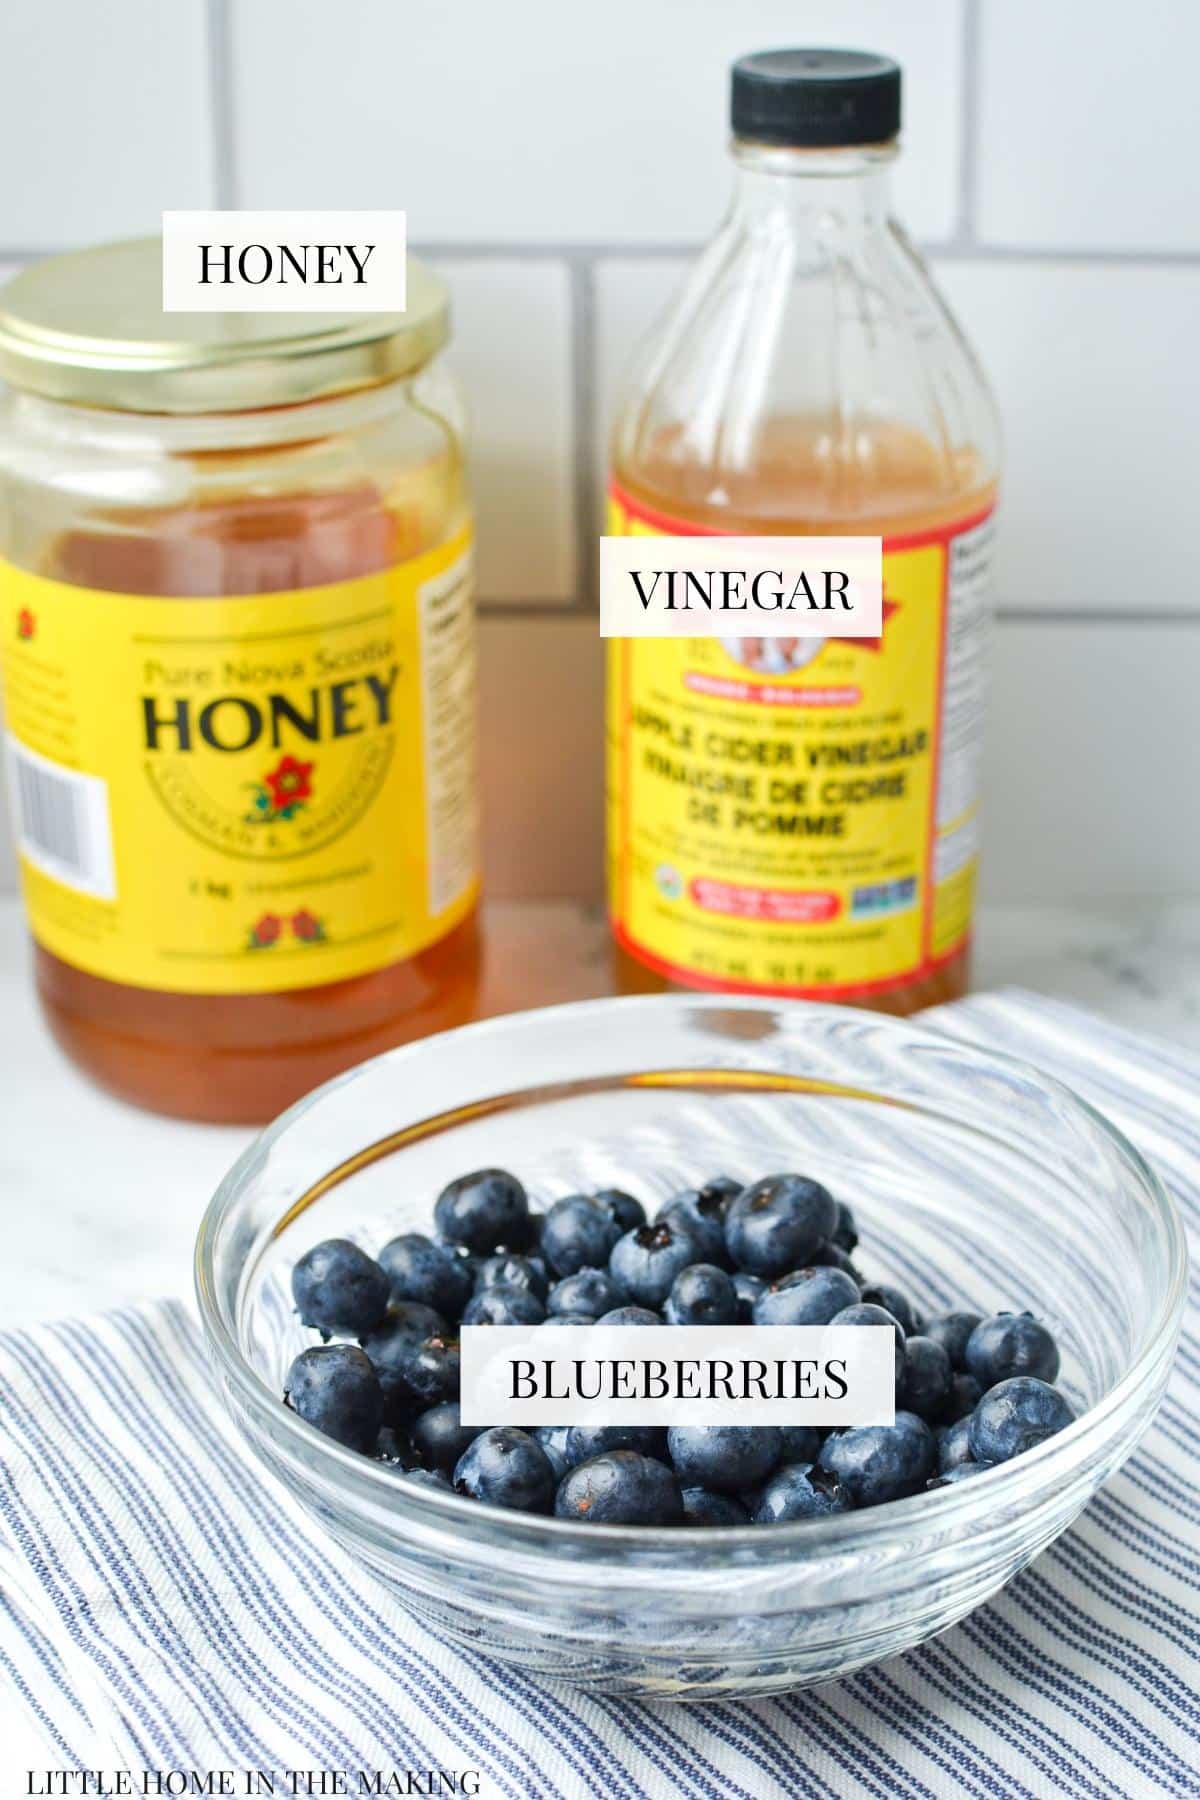 The ingredients needed to make a shrub - blueberries, apple cider vinegar, and honey.